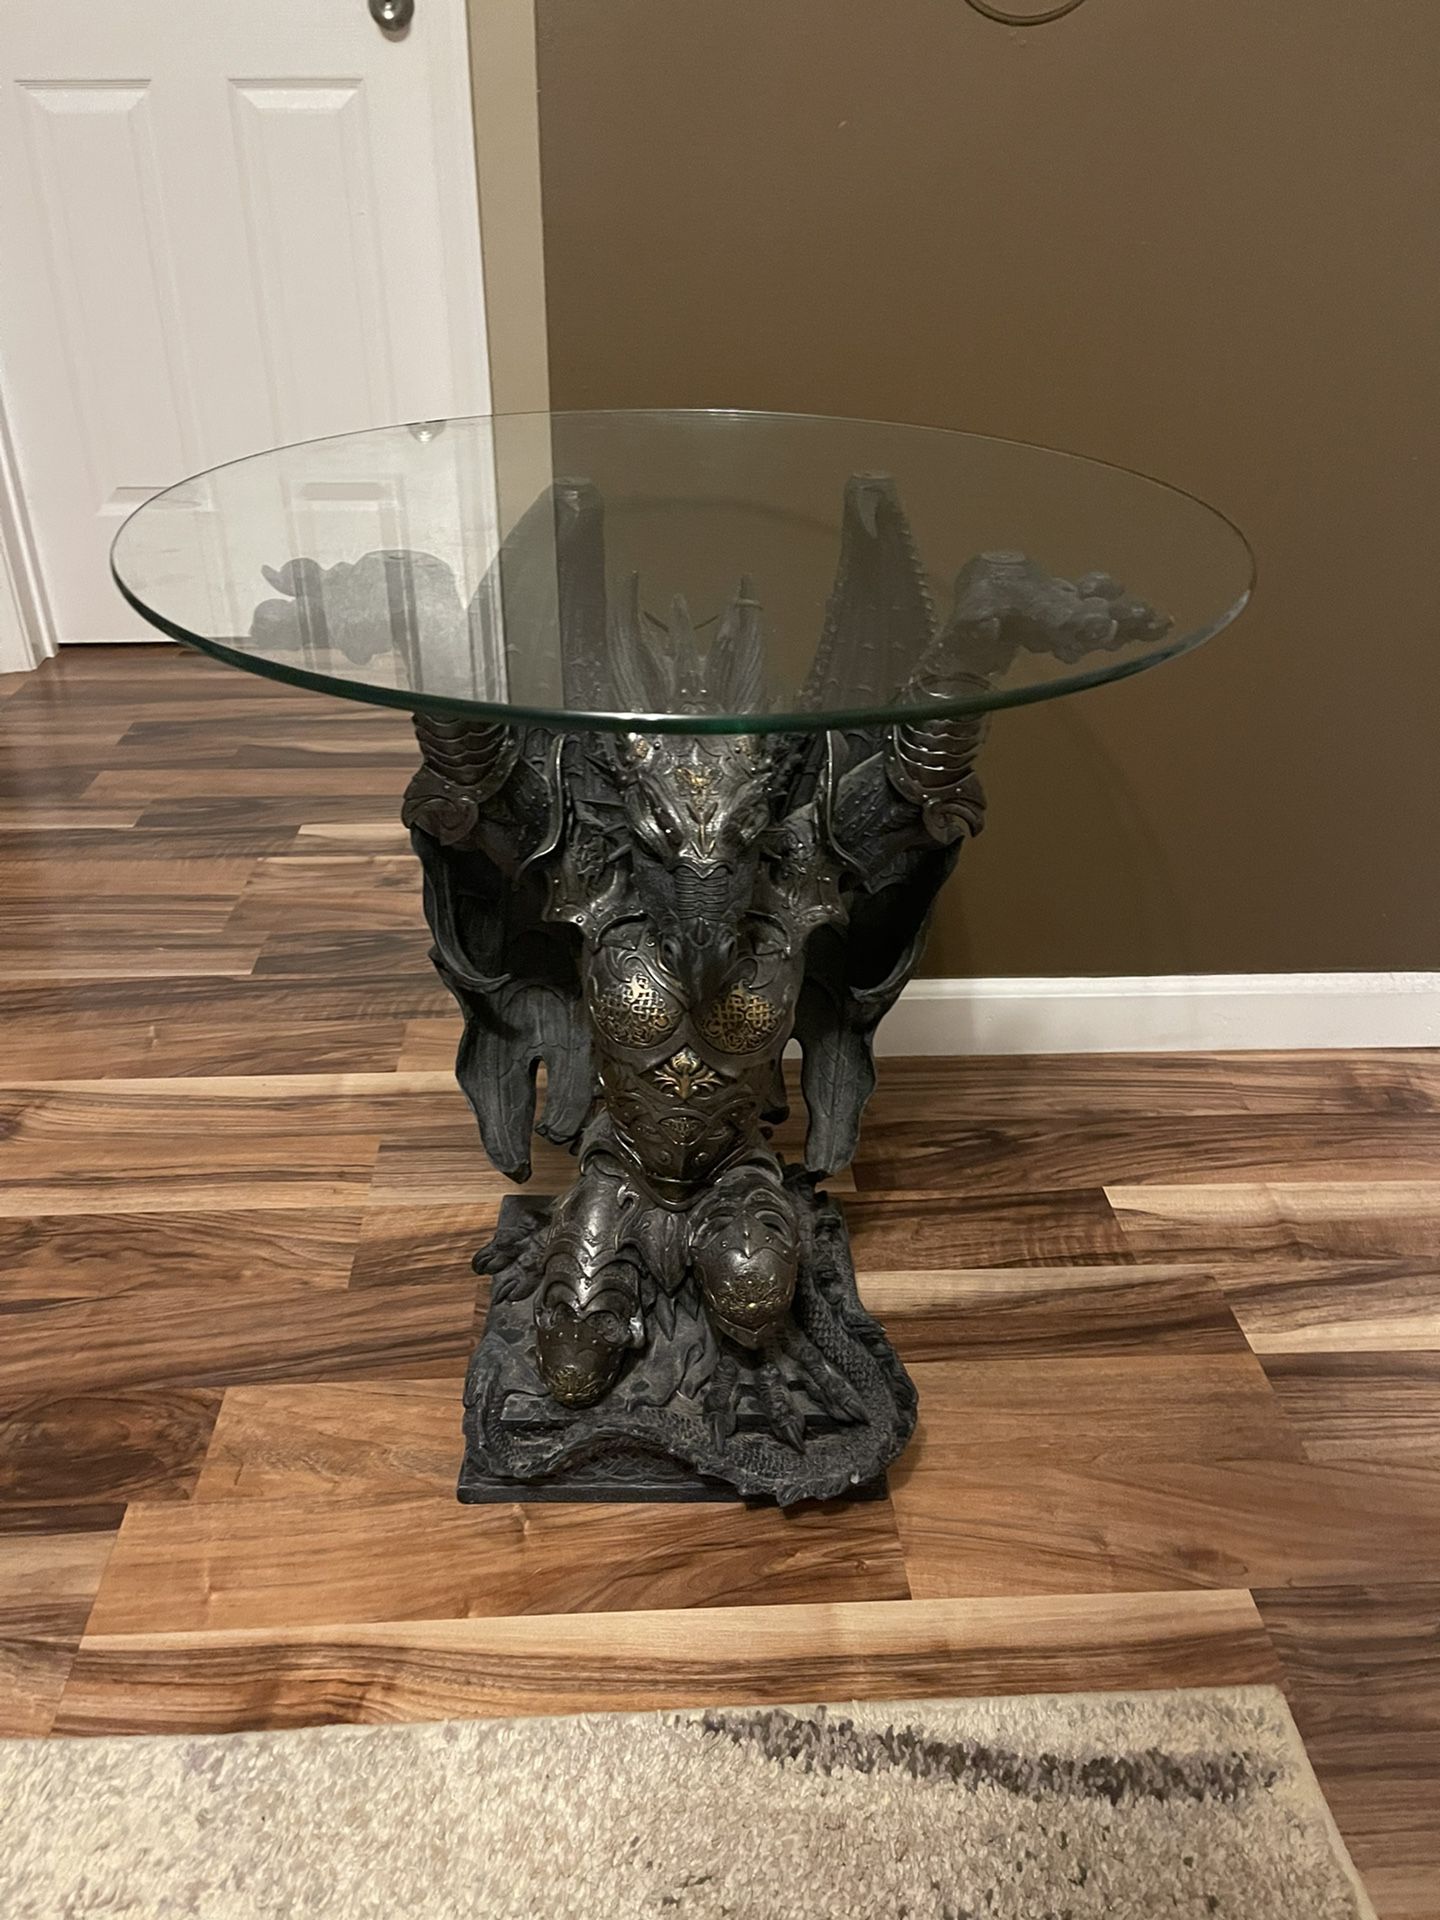 Design Toscano Hastings, the Warrior Dragon Glass-Topped Sculptural Table